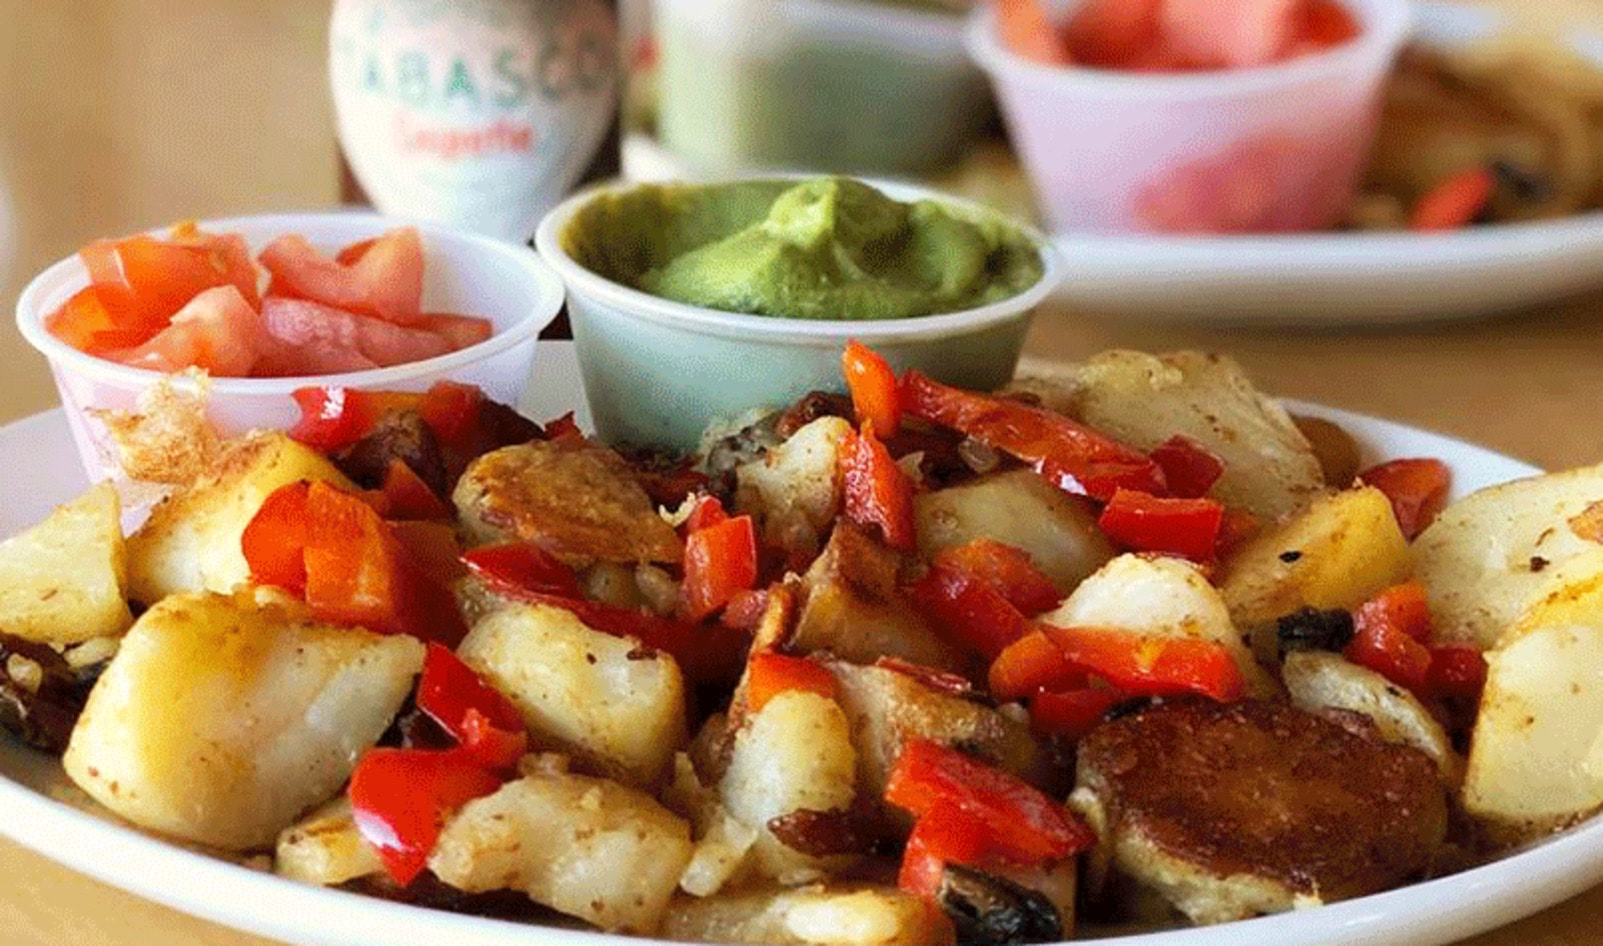 Tabasco Partners with All-Day Breakfast Chain to Promote Vegan Hash